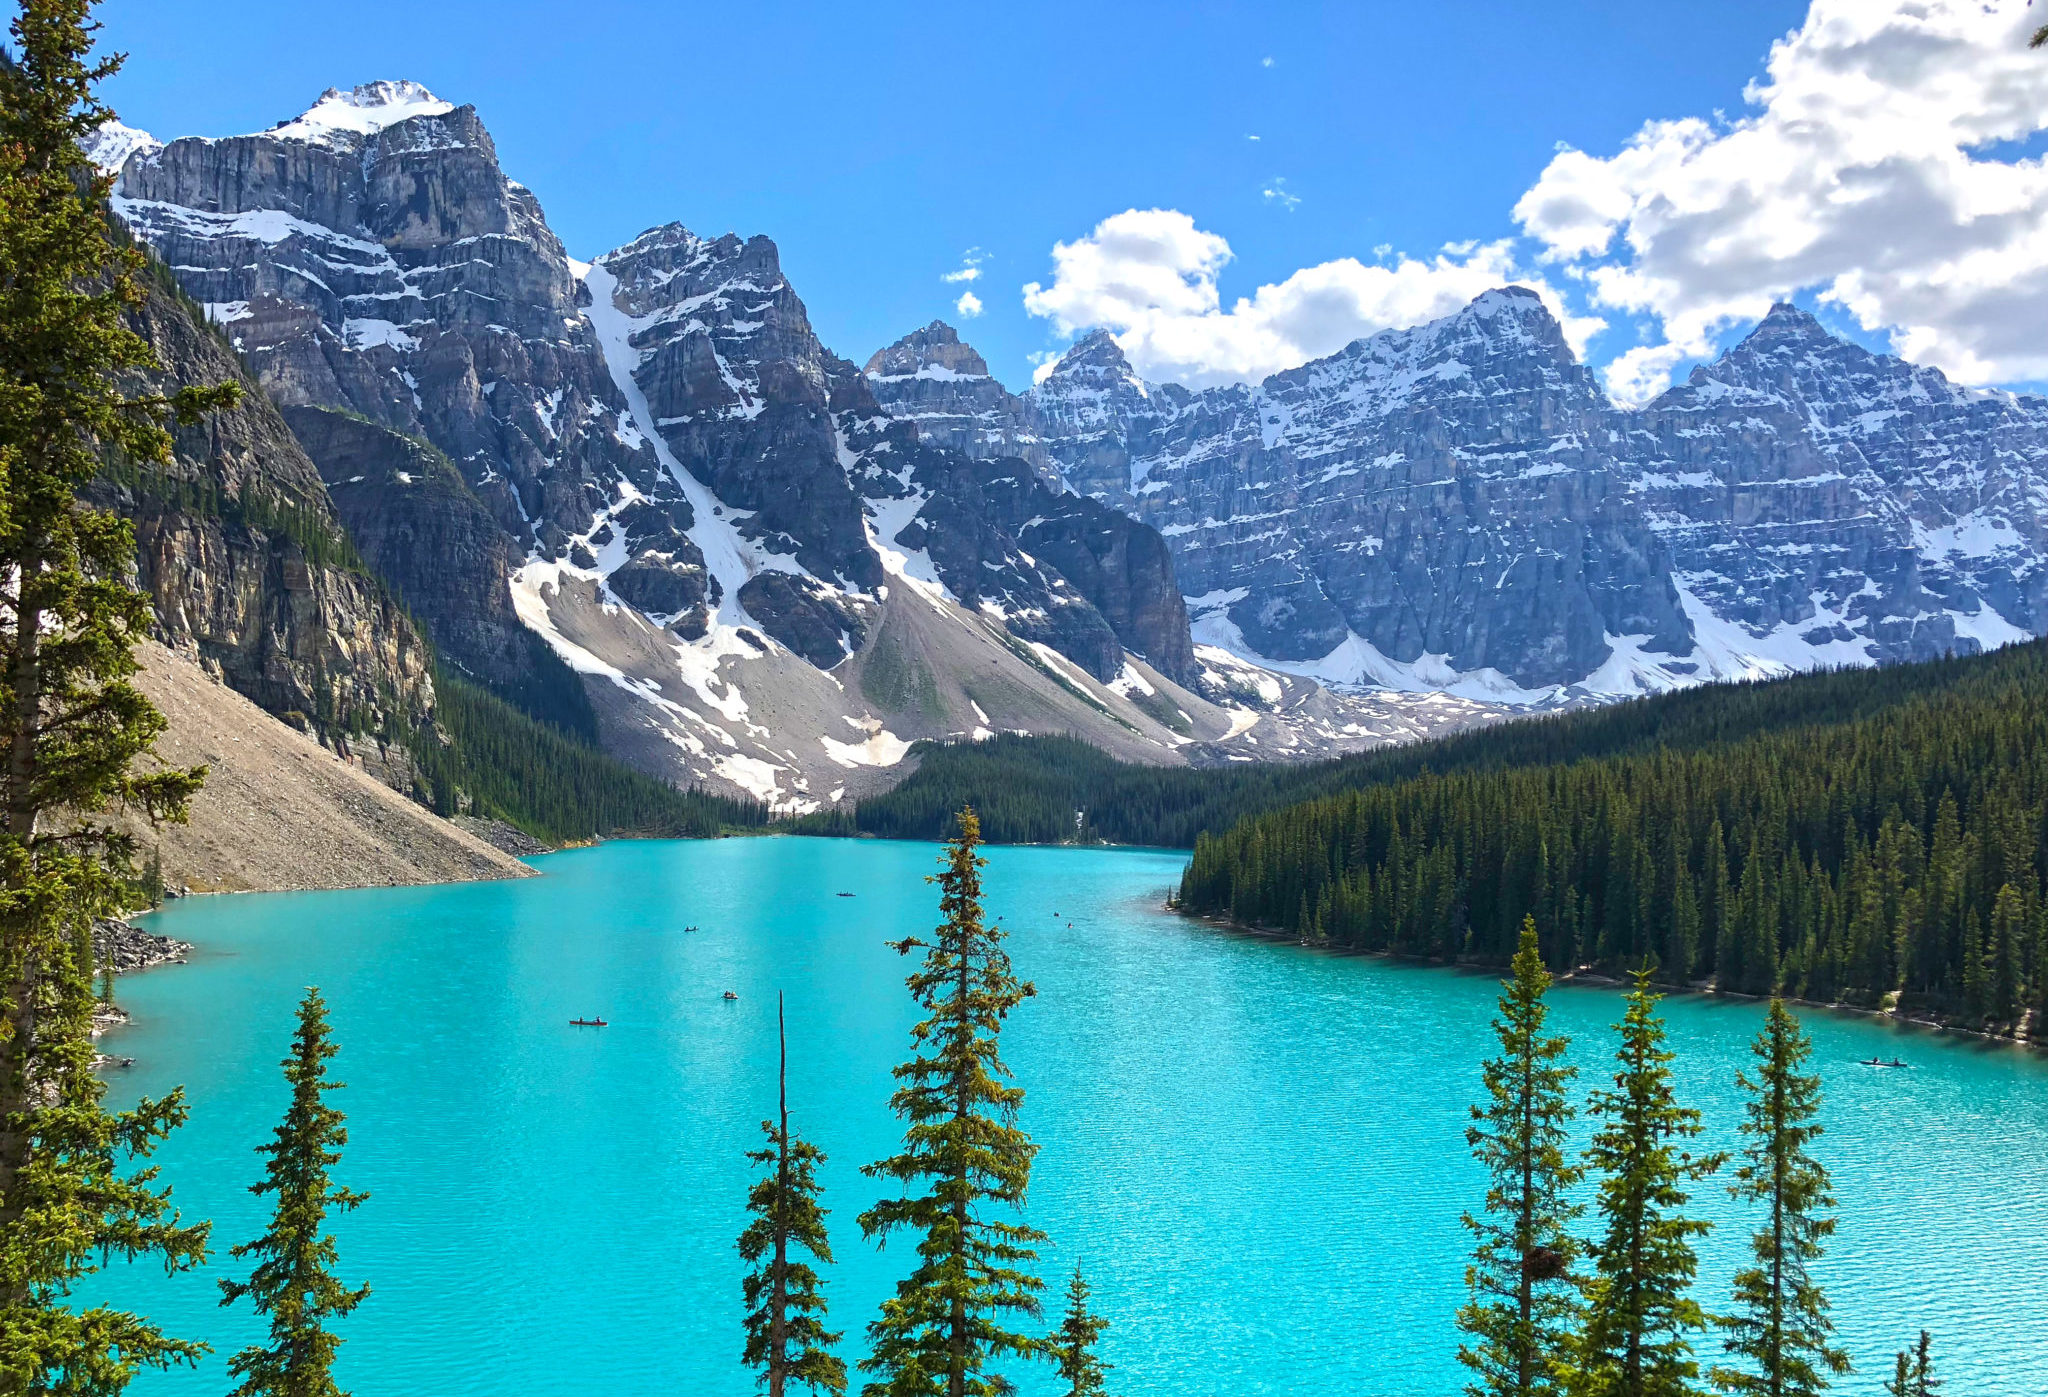 Moraine Lake Canada Ten Most Scenic Places to Visit in Canada